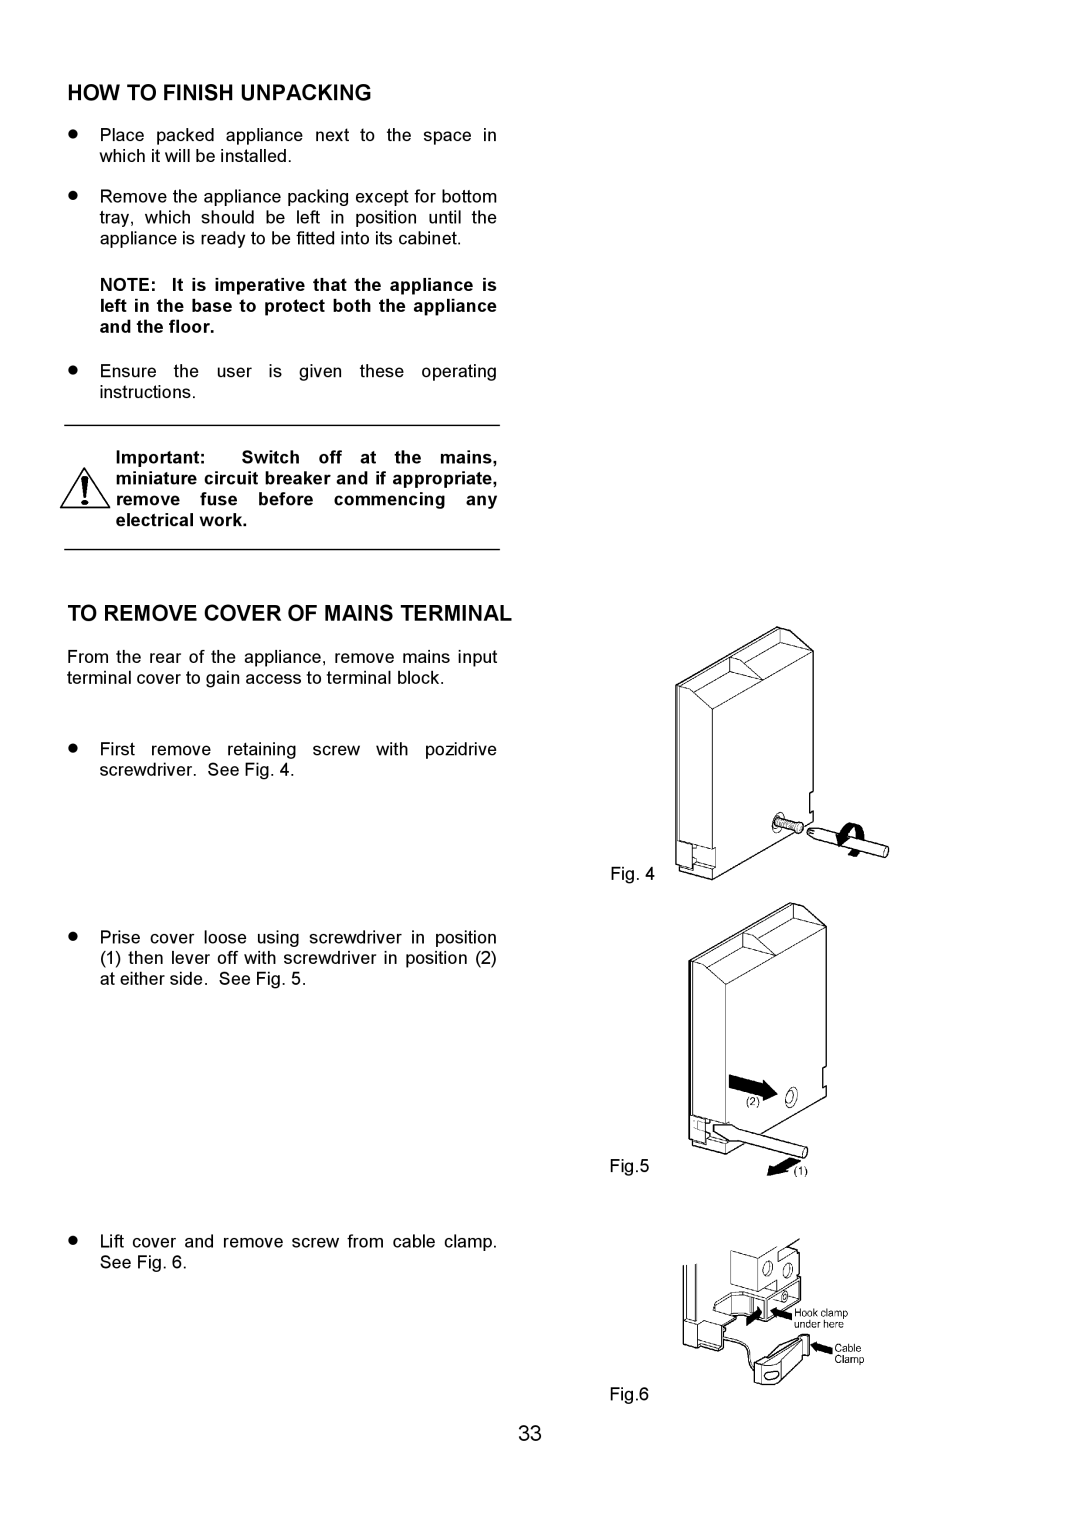 Electrolux D2100-4 manual HOW to Finish Unpacking, To Remove Cover of Mains Terminal 